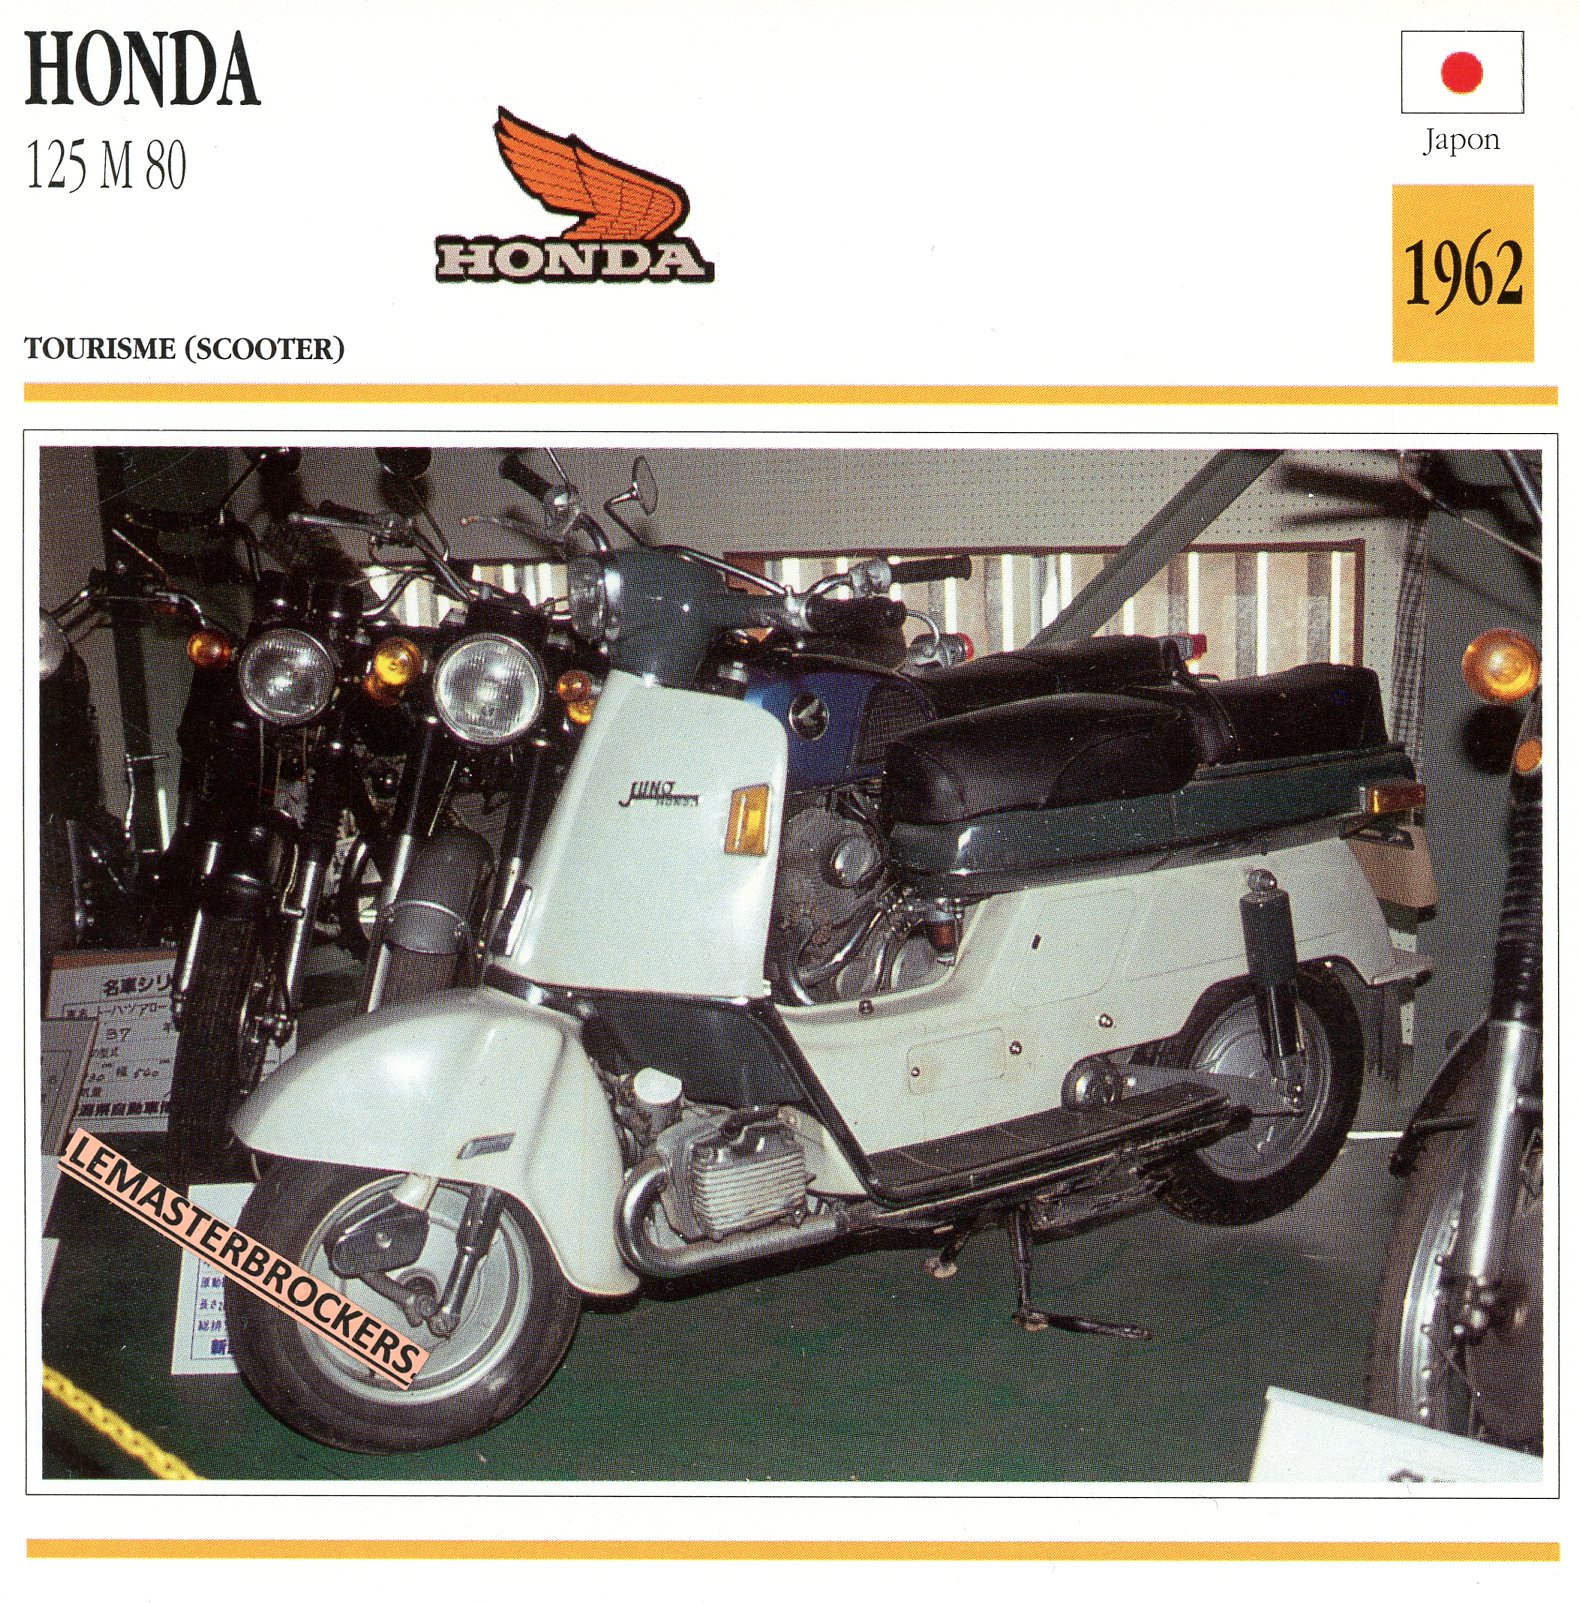 FICHE-SCOOTER-HONDA-125-M80-1962-LEMASTERBROCKERS-CARS-MOTORCYCLE